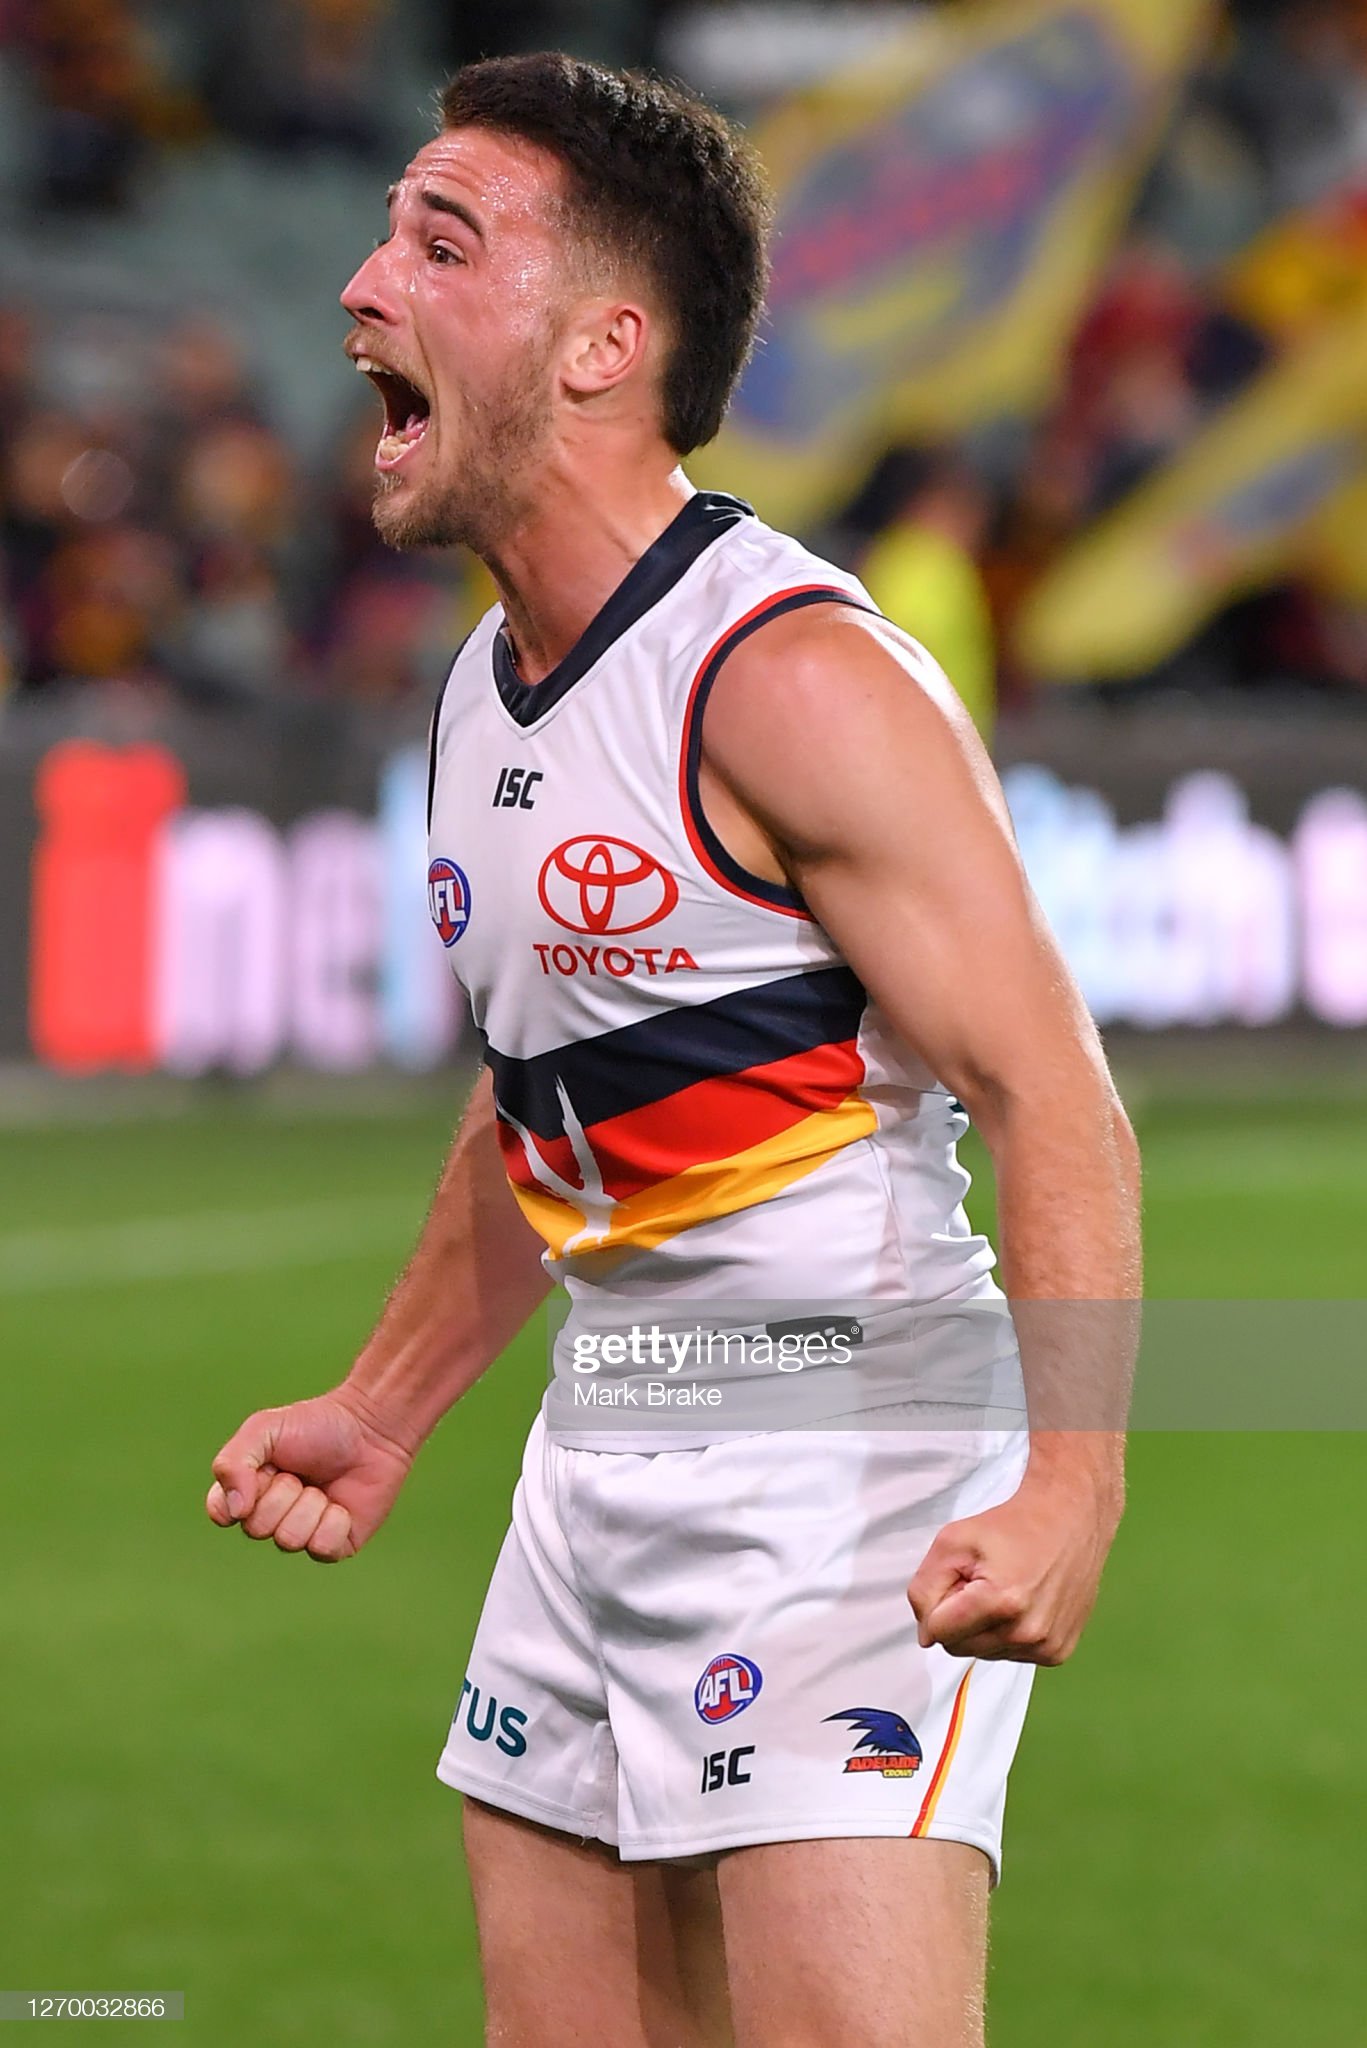 lachlan-murphy-of-the-crows-celebrates-a-goal-during-the-round-15-afl-picture-id1270032866